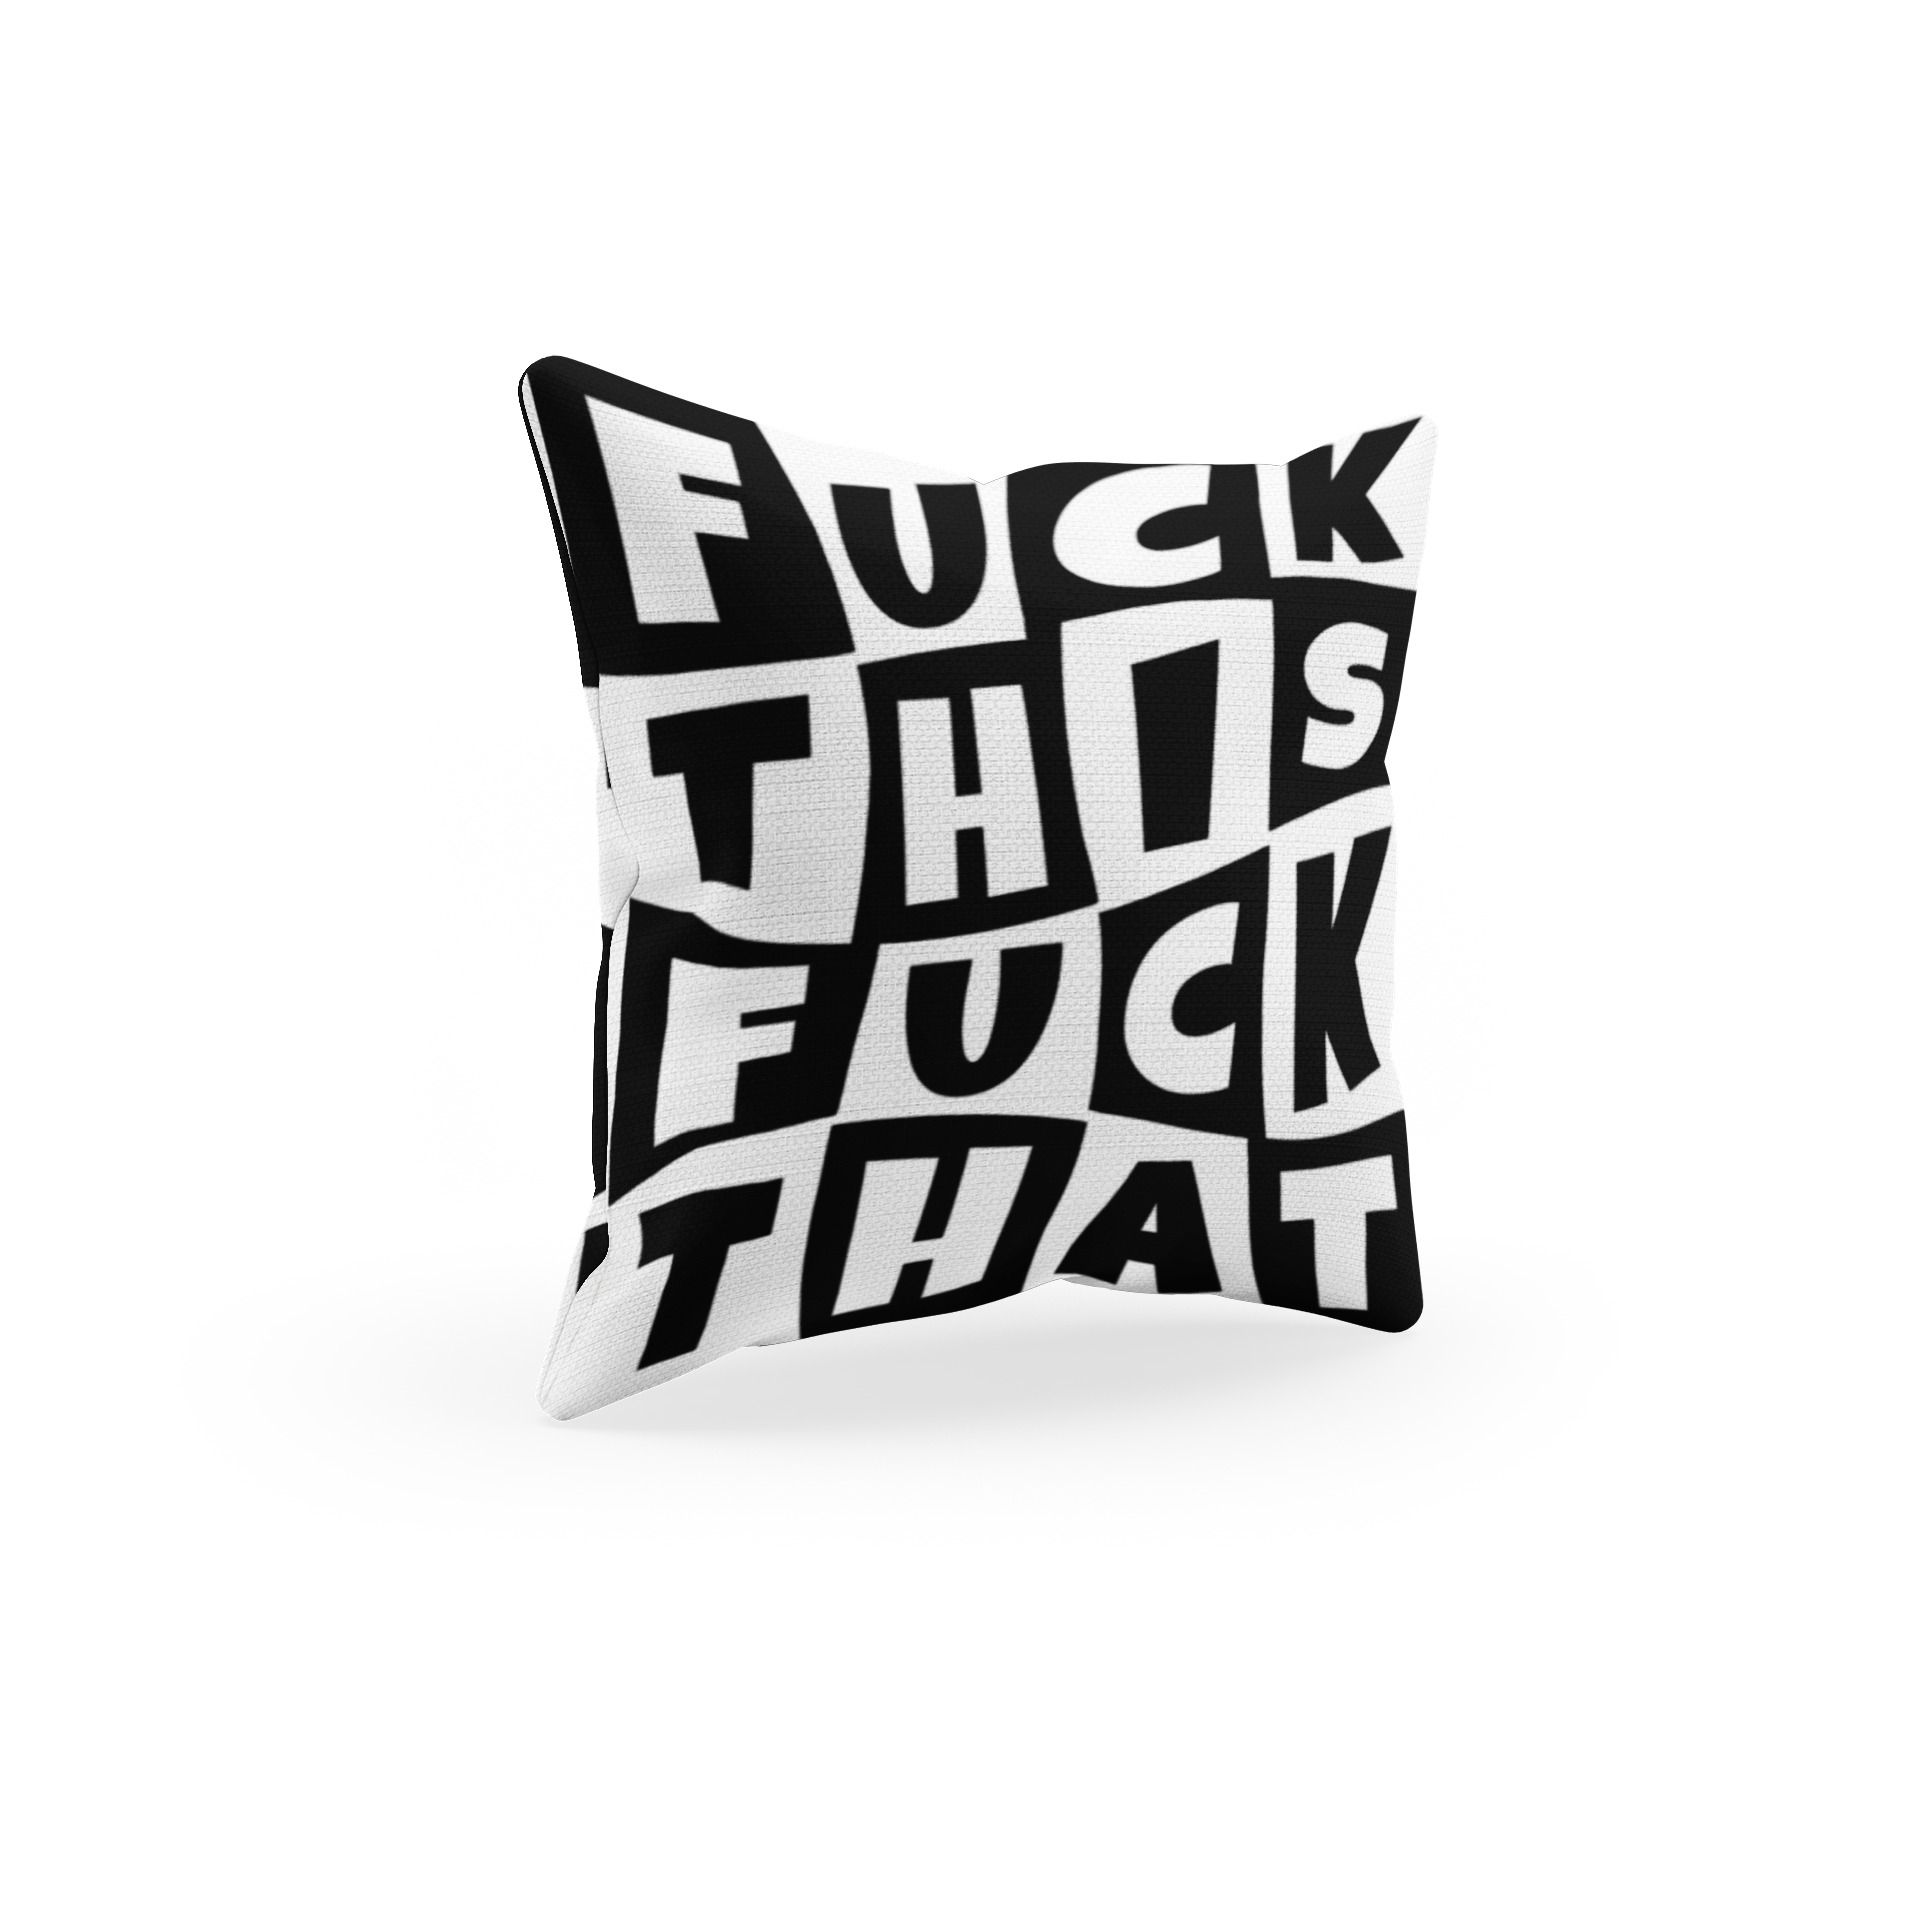 *SAMPLE* FUCK THIS FUCK THAT CUSHION COVER